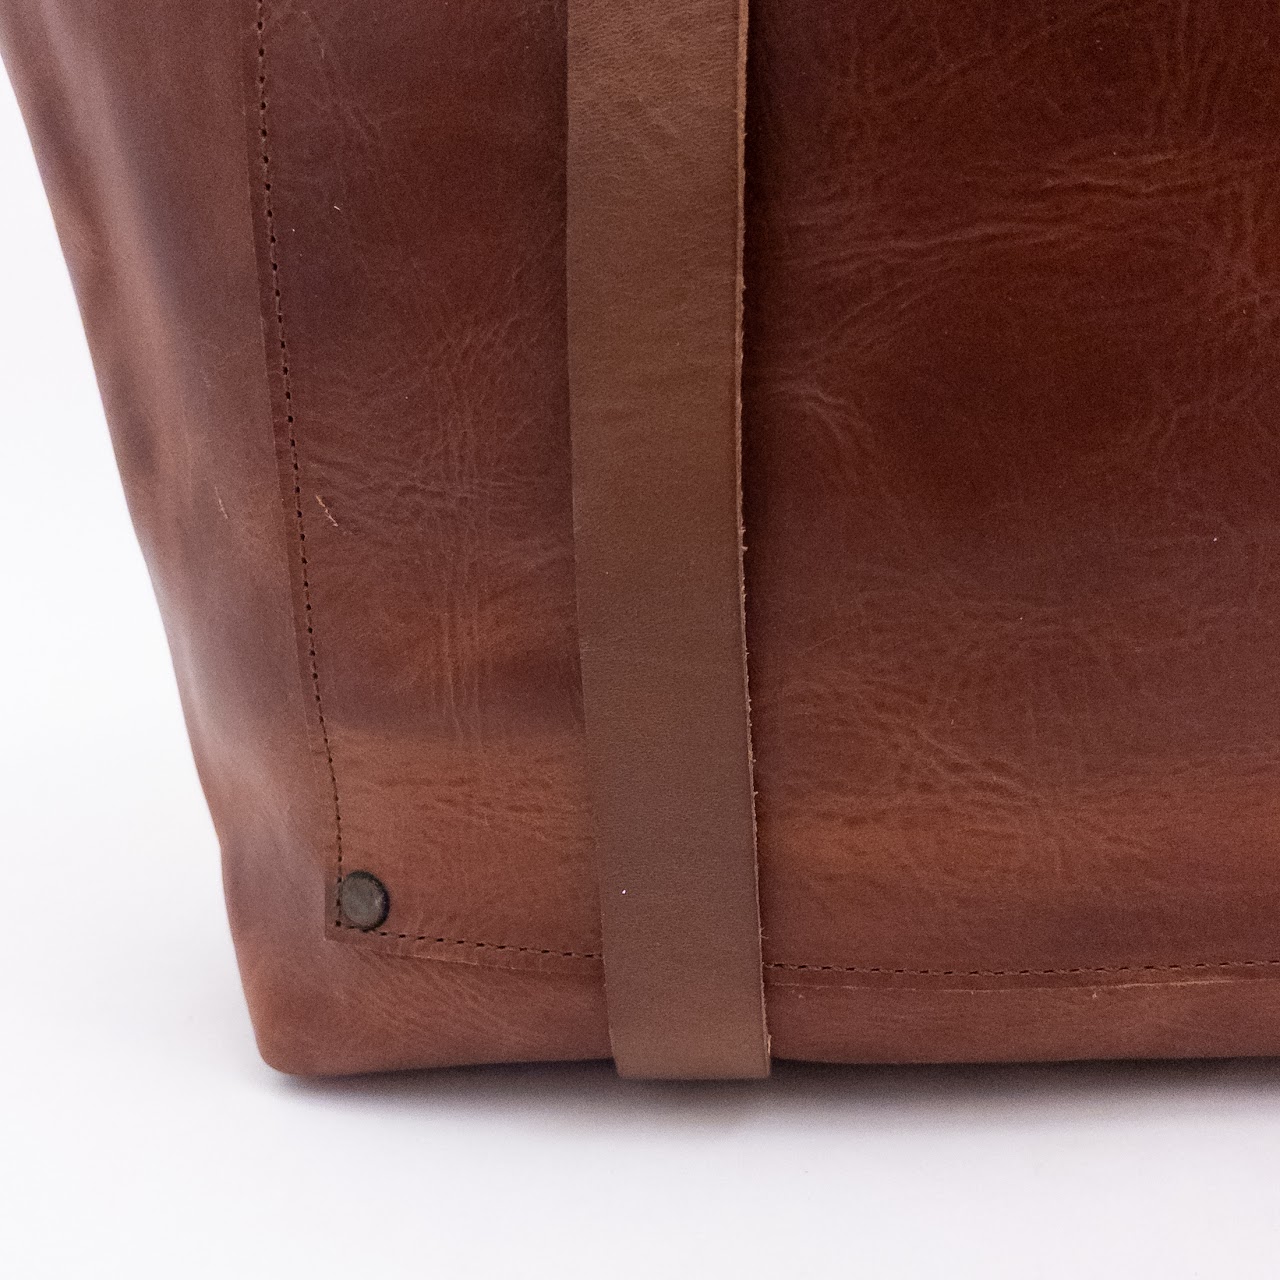 Whipping Post WP-05 Leather Tote Bag